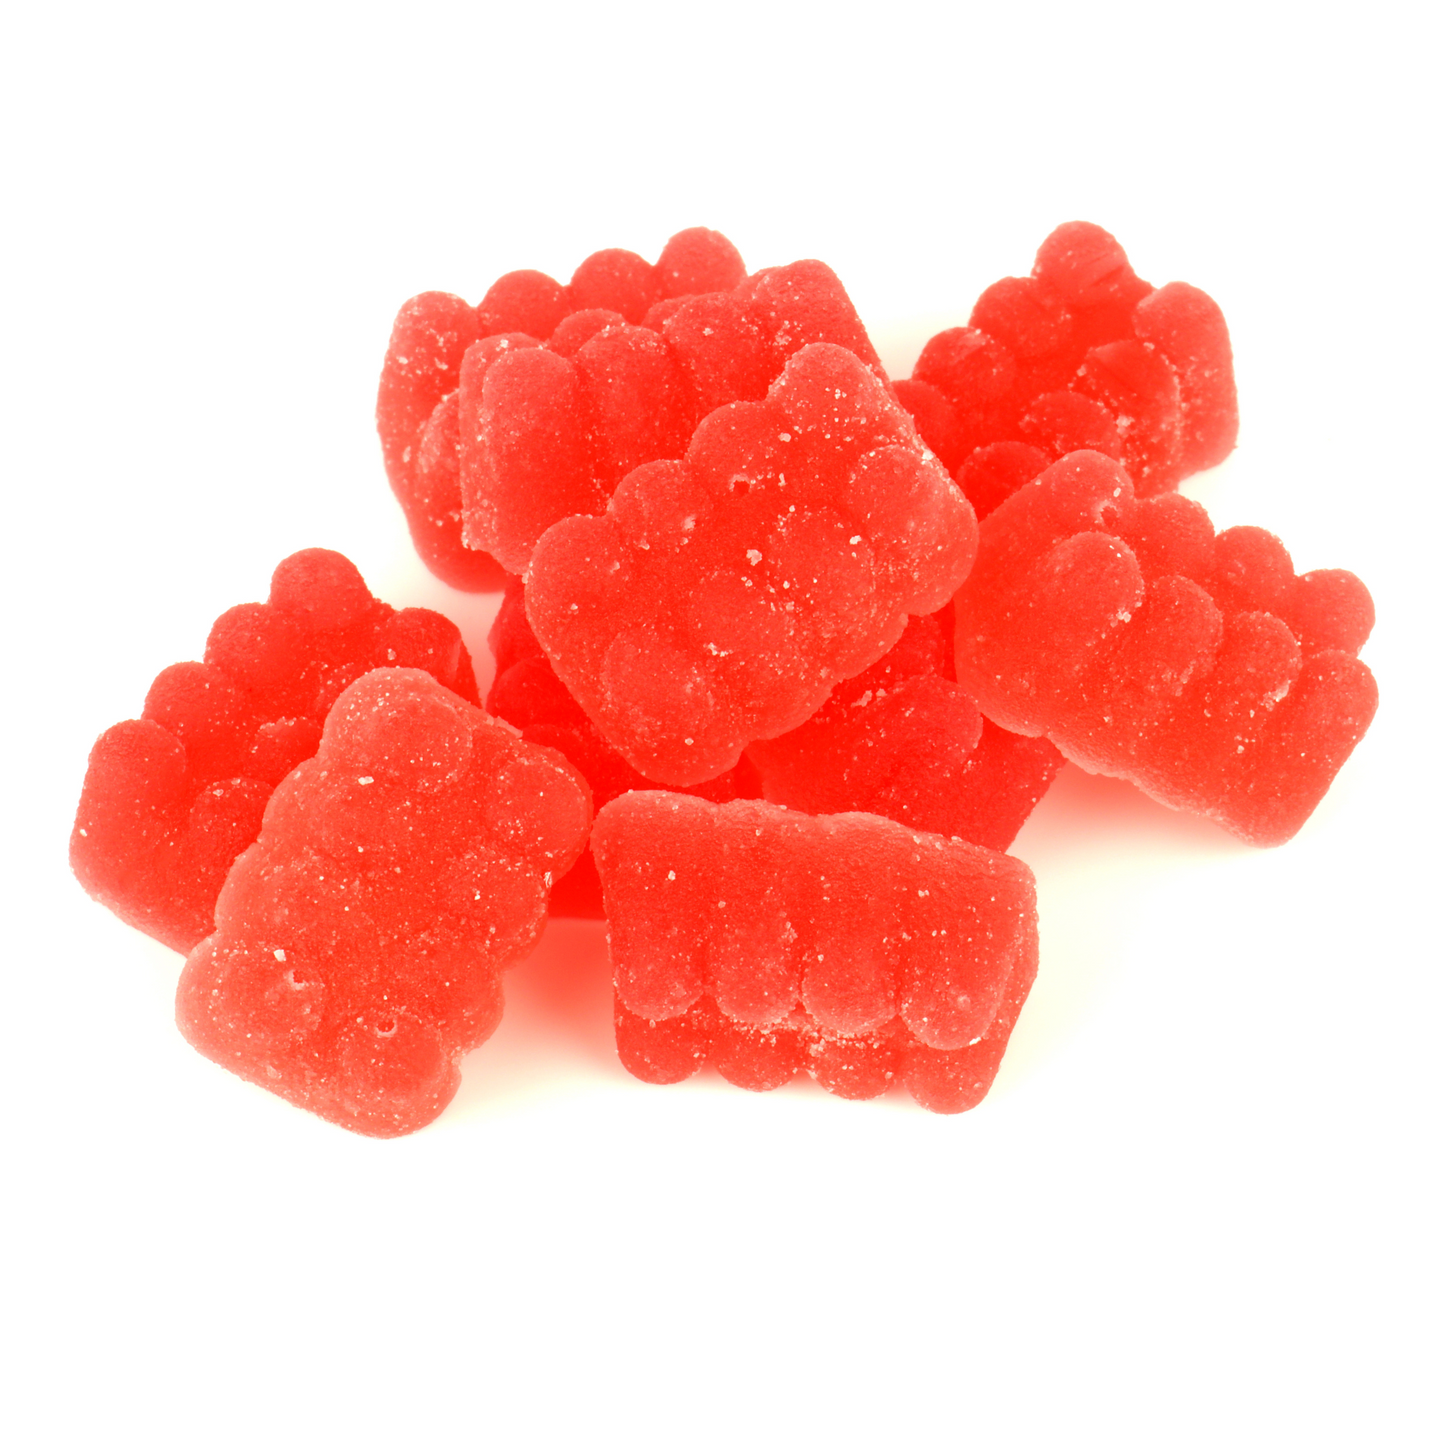  Gummy form of Diphenhydramine medication. Antihistamine in a soft chewable with a gummy texture.